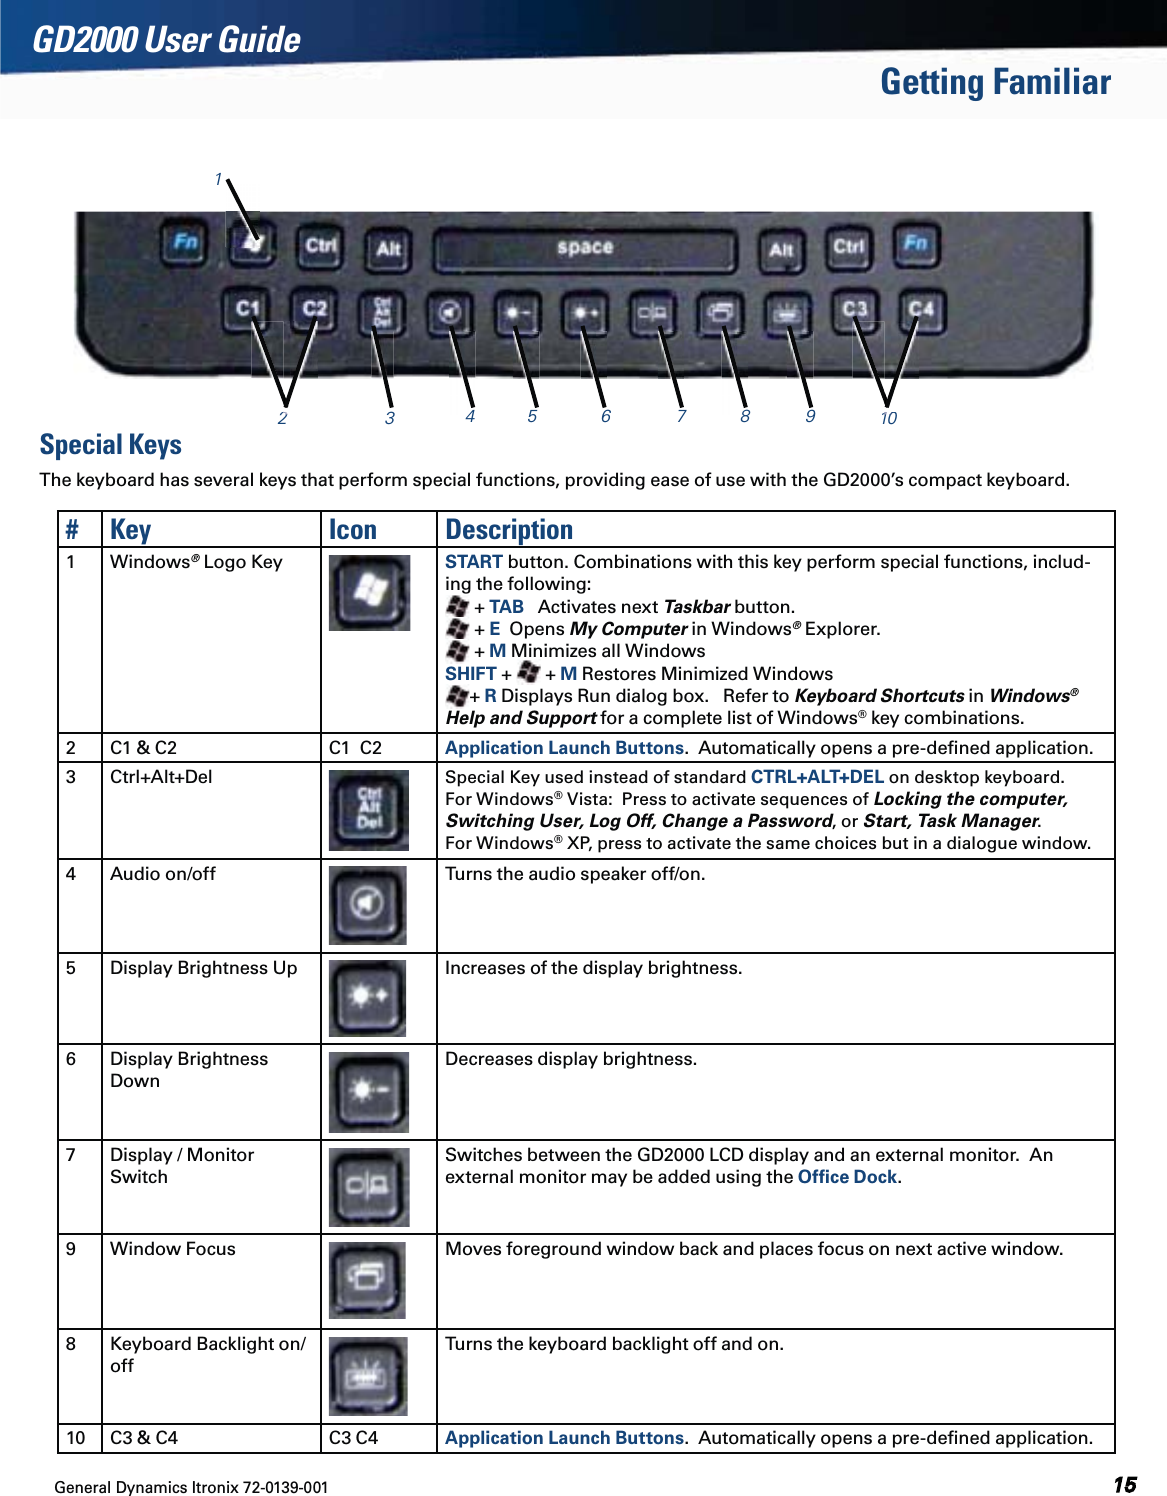 General Dynamics Itronix 72-0139-001  GD2000 User GuideGetting FamiliarSpecial KeysThe keyboard has several keys that perform special functions, providing ease of use with the GD2000’s compact keyboard.# Key Icon Description1Windows® Logo Key START button. Combinations with this key perform special functions, includ-ing the following:   + TAB   Activates next Taskbar button.  + E  Opens My Computer in Windows® Explorer.  + M Minimizes all Windows SHIFT +   + M Restores Minimized Windows    + R Displays Run dialog box.   Refer to Keyboard Shortcuts in Windows® Help and Support for a complete list of Windows® key combinations.2 C1 &amp; C2 C1  C2 Application Launch Buttons.  Automatically opens a pre-deﬁned application.3Ctrl+Alt+Del Special Key used instead of standard CTRL+ALT+DEL on desktop keyboard.  For Windows® Vista:  Press to activate sequences of Locking the computer, Switching User, Log Off, Change a Password, or Start, Task Manager.   For Windows® XP, press to activate the same choices but in a dialogue window.4 Audio on/off Turns the audio speaker off/on.5 Display Brightness Up Increases of the display brightness.6 Display Brightness DownDecreases display brightness.7 Display / Monitor SwitchSwitches between the GD2000 LCD display and an external monitor.  An external monitor may be added using the Ofﬁce Dock.9 Window Focus Moves foreground window back and places focus on next active window.8 Keyboard Backlight on/offTurns the keyboard backlight off and on.  10 C3 &amp; C4 C3 C4 Application Launch Buttons.  Automatically opens a pre-deﬁned application. 2122222342222222225 6 7 101000011011000100101100011100010008 9